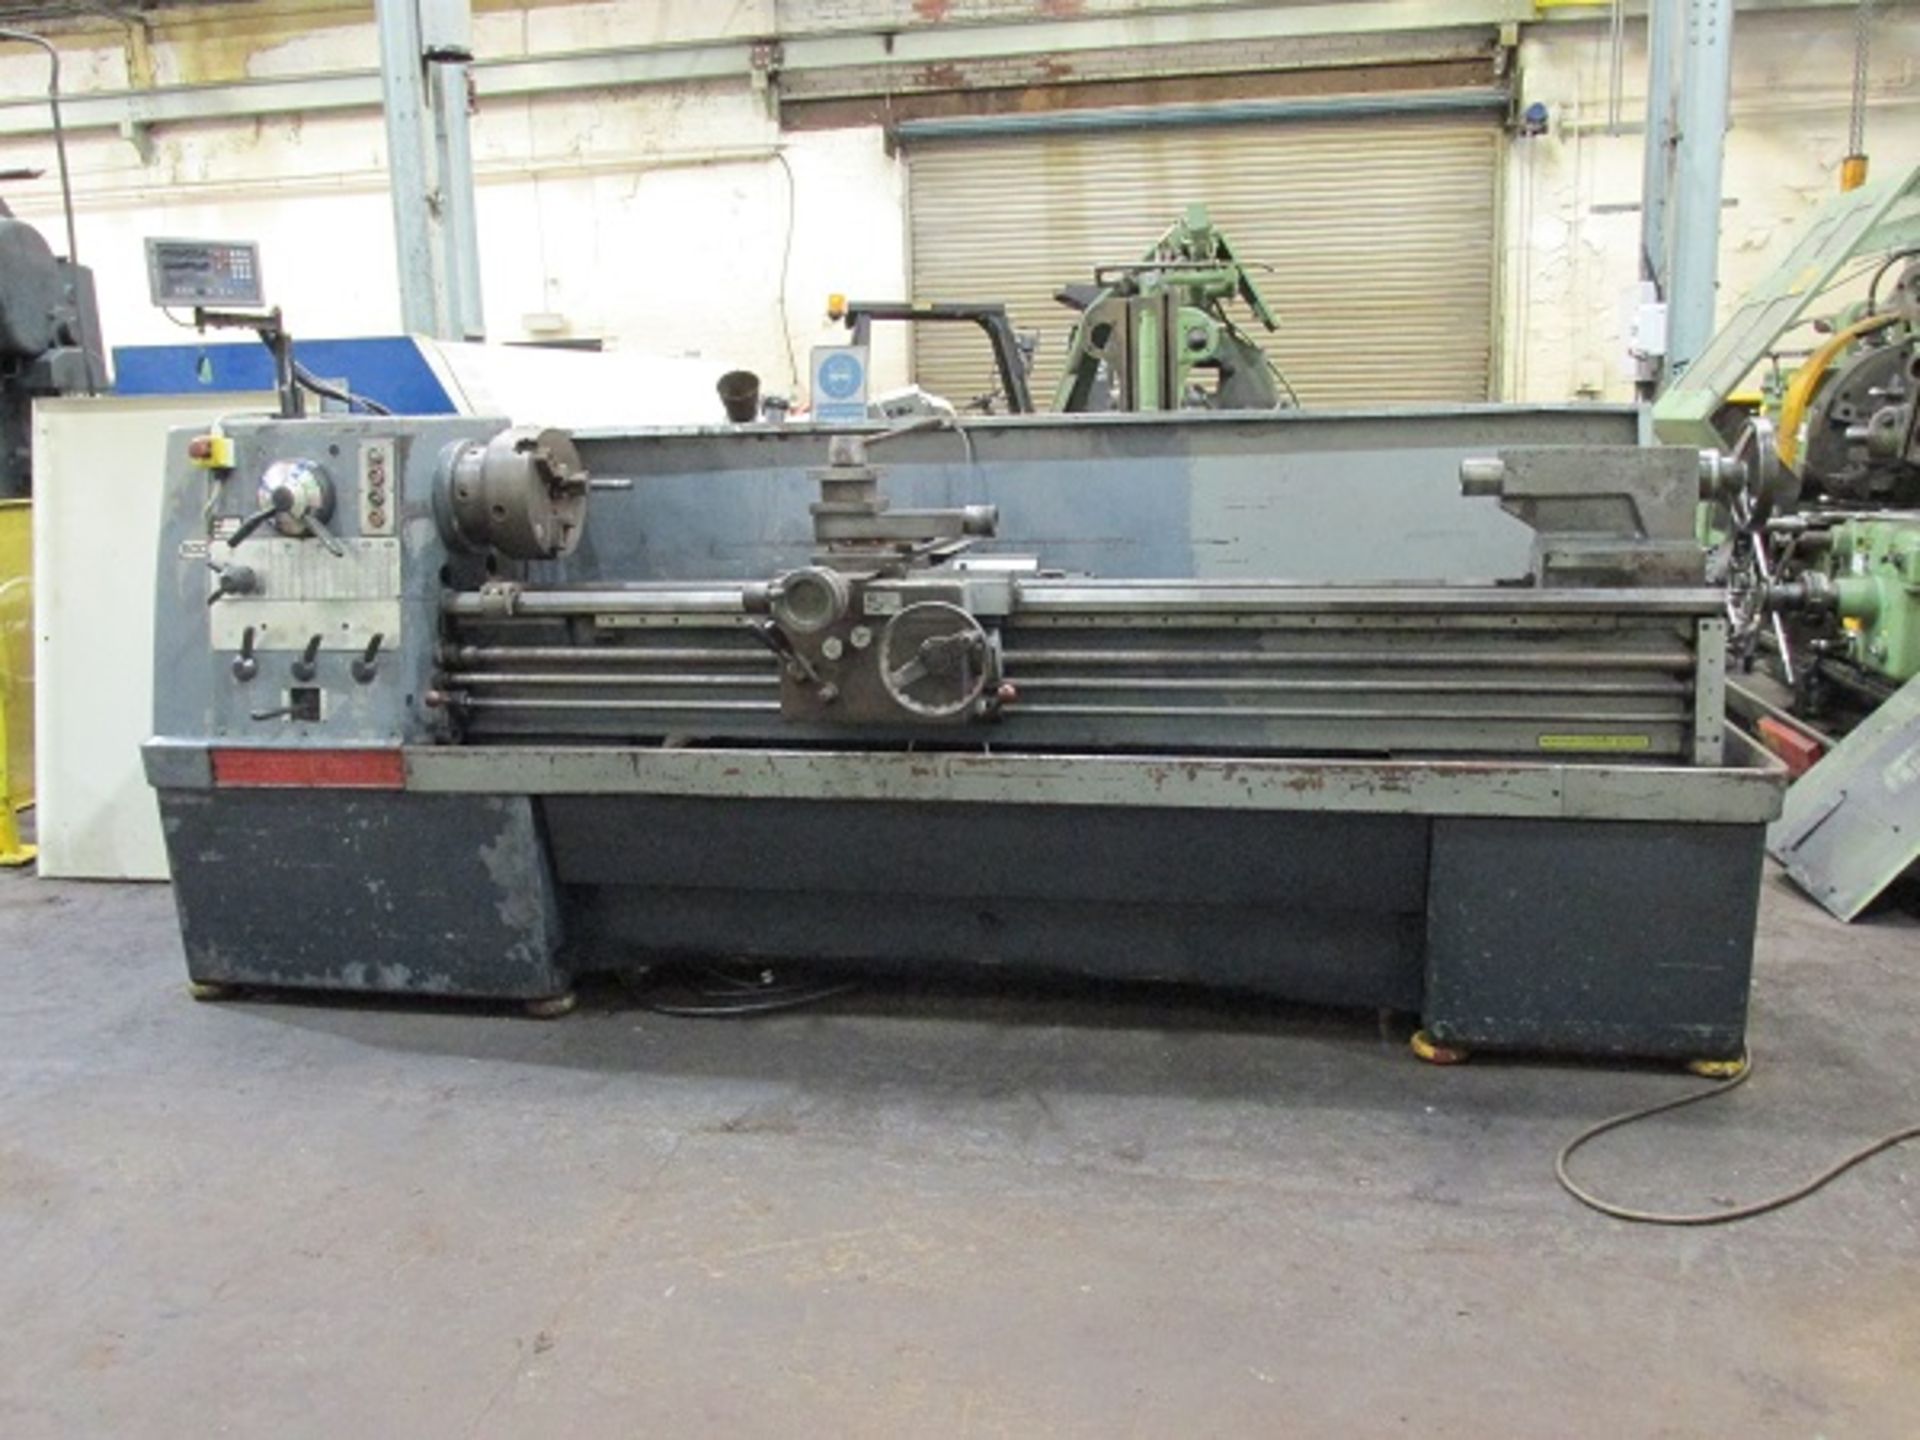 Colchester Mascot 1600 Gap Bed Lathe x 2000mm - Image 2 of 6